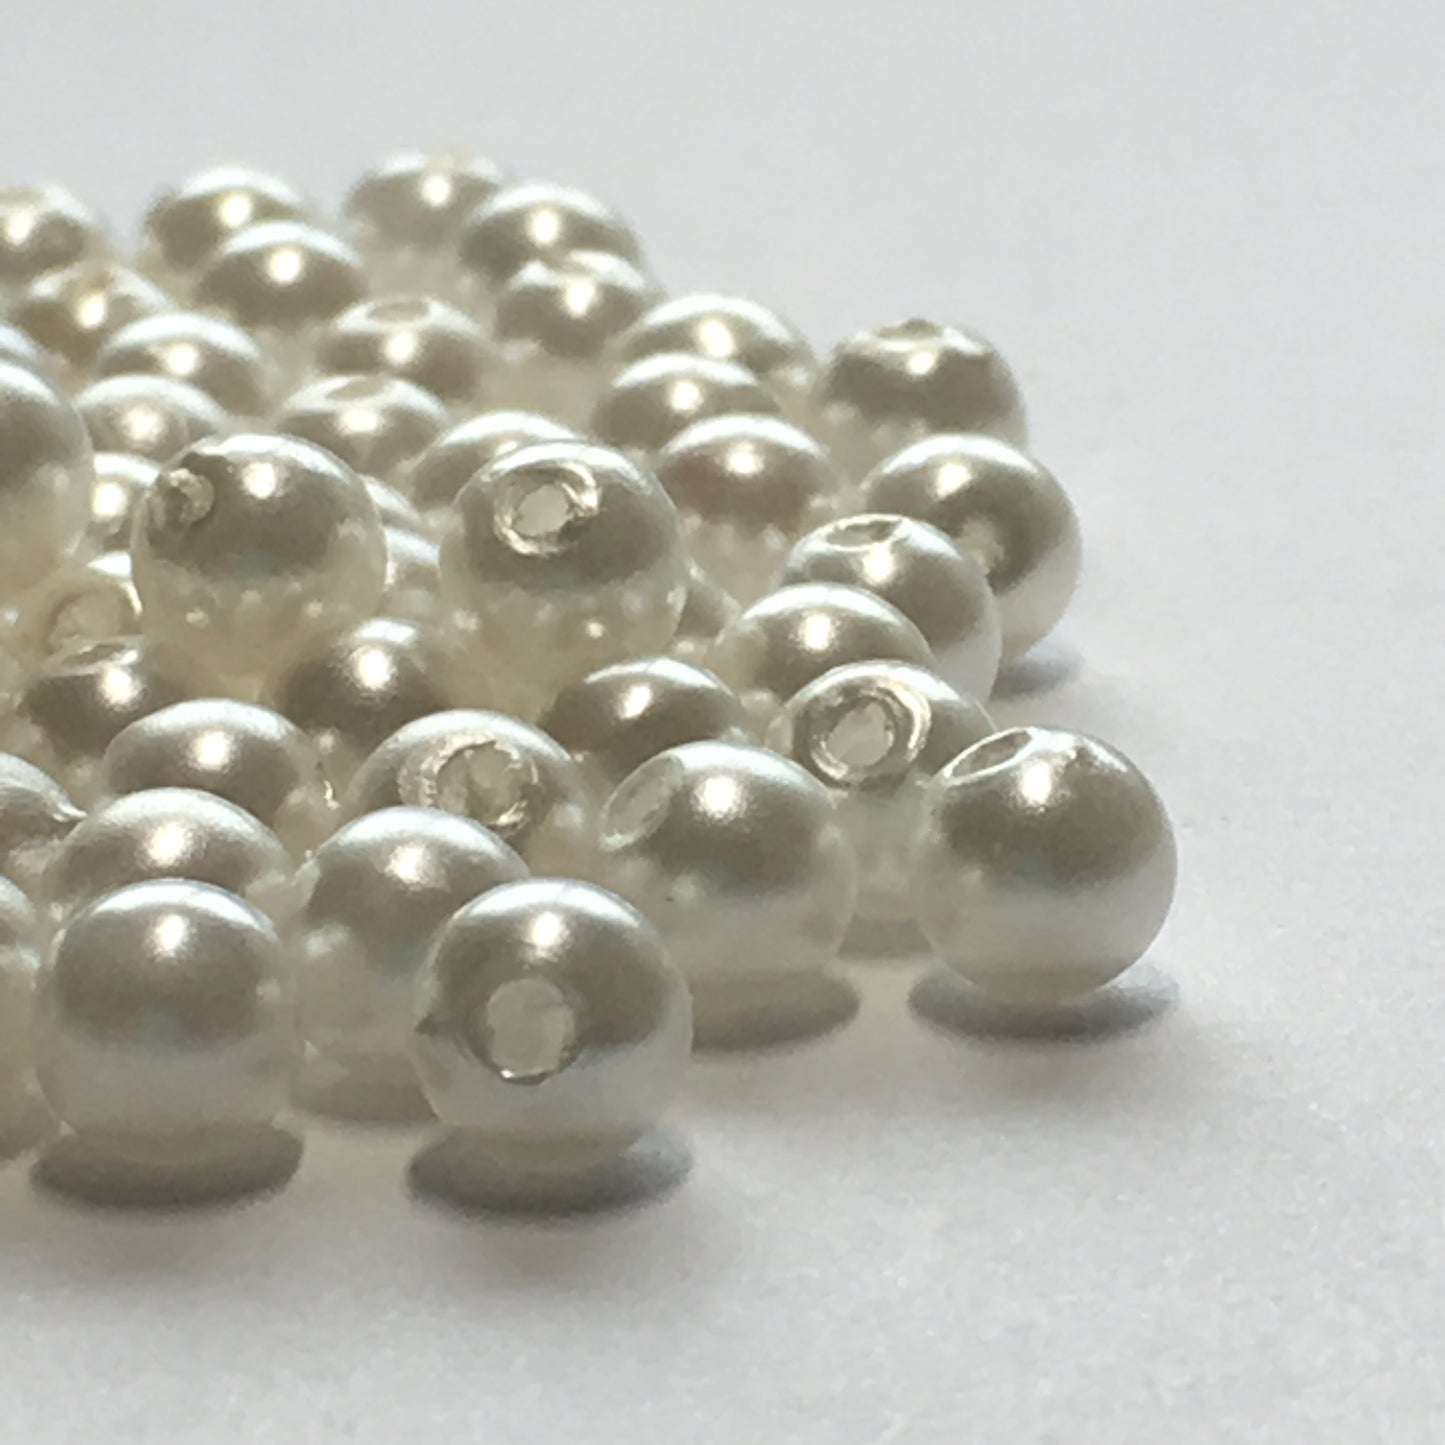 White Pearl Round Acrylic Beads, 5 mm - Approximately 100 Beads